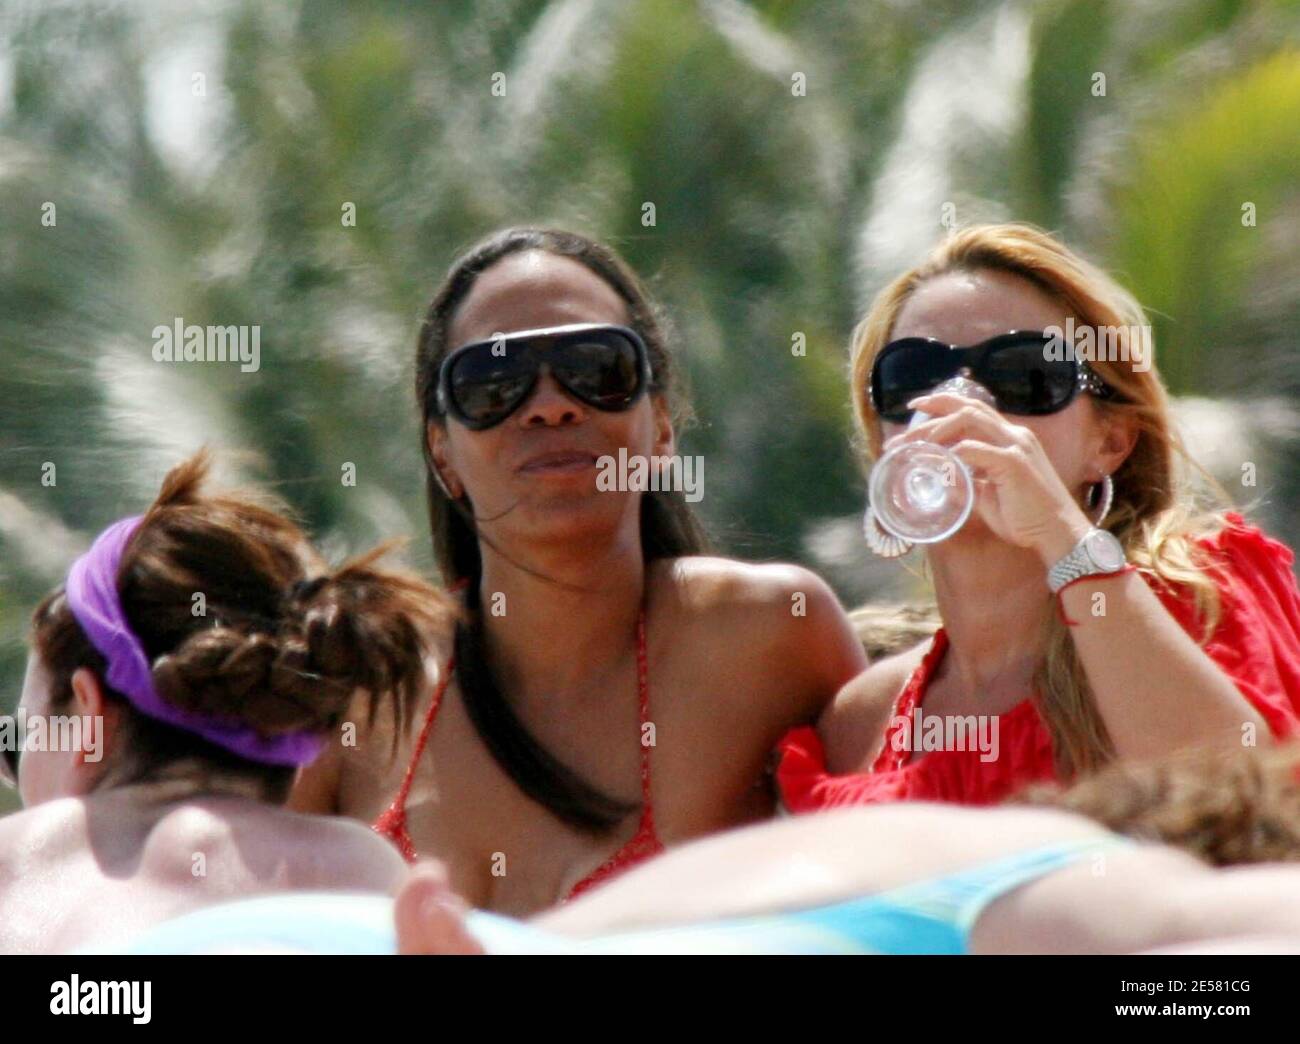 Exclusive!! Barbara Becker and sons spend a day on Miami Beach with friends. She drank champagne and had lunch while sons Noah and Elias played soccer with their father Boris Becker and girlfriend Sharlely Kerssenberg at the adjacent hotel, 04/09/07.   [[tag mab]] Stock Photo